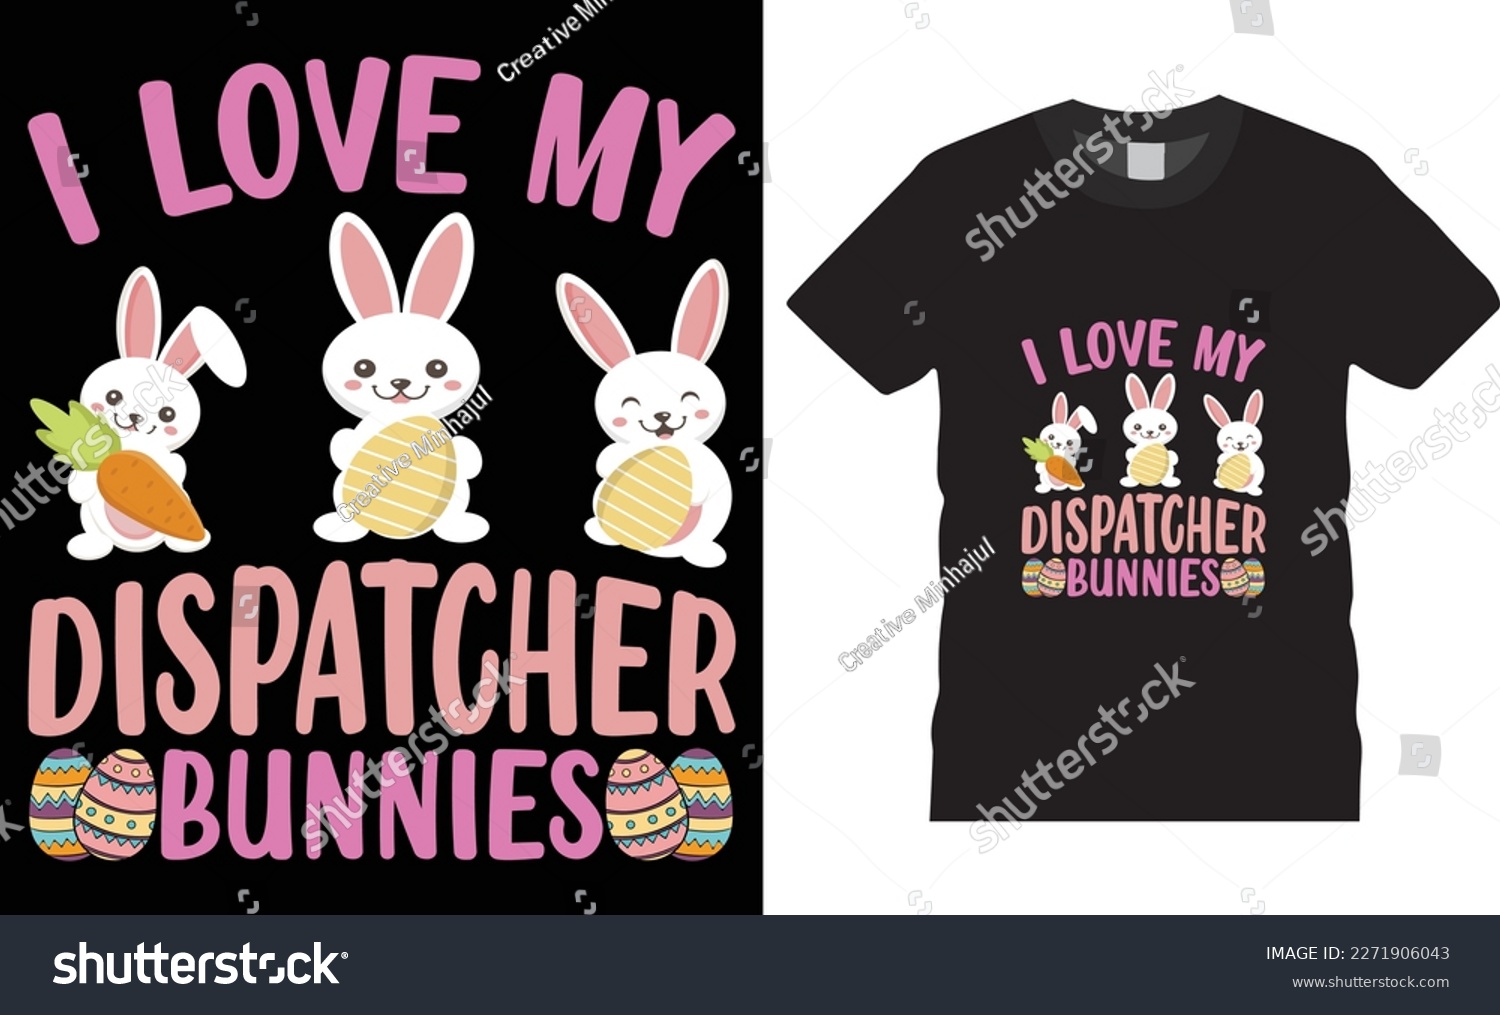 SVG of Happy easter rabbit, bunny tshirt vector design template.I love my dispetcher bunny t-shirt design.Ready to print for apparel, poster, mug and greeting plate illustration. svg